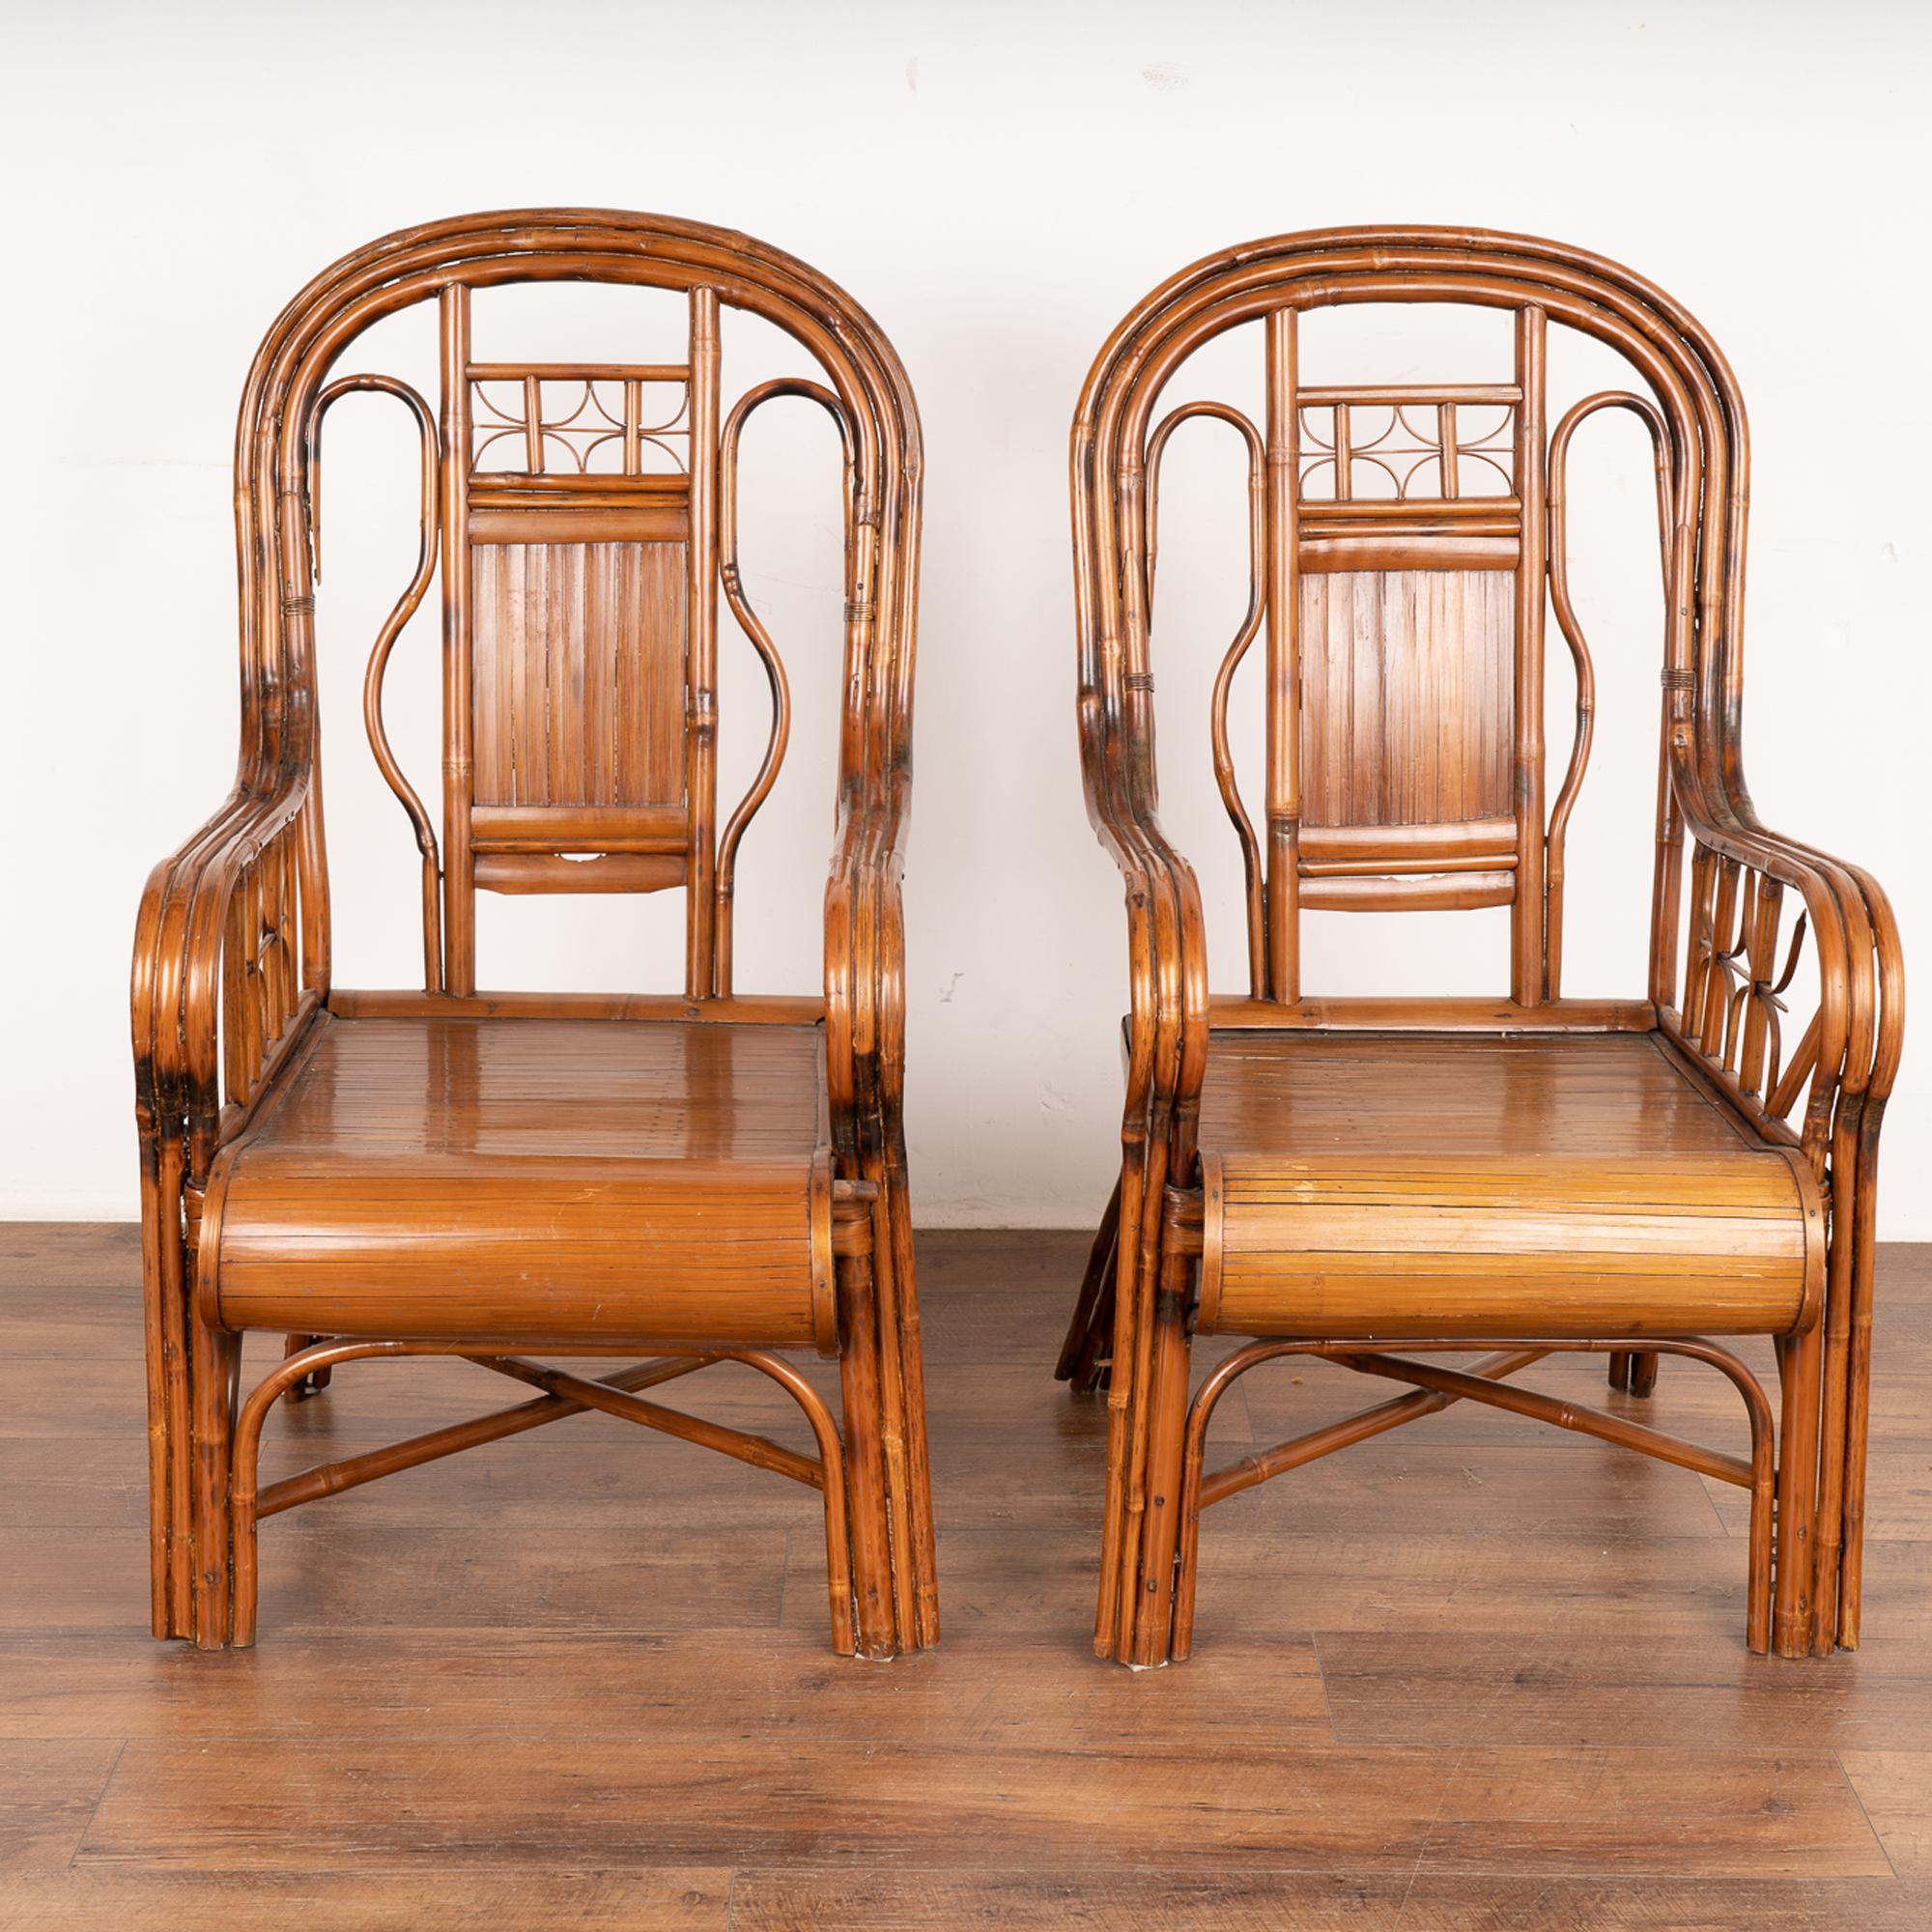 Chinese Export Pair, Bamboo Arm Chairs, China circa 1880 For Sale